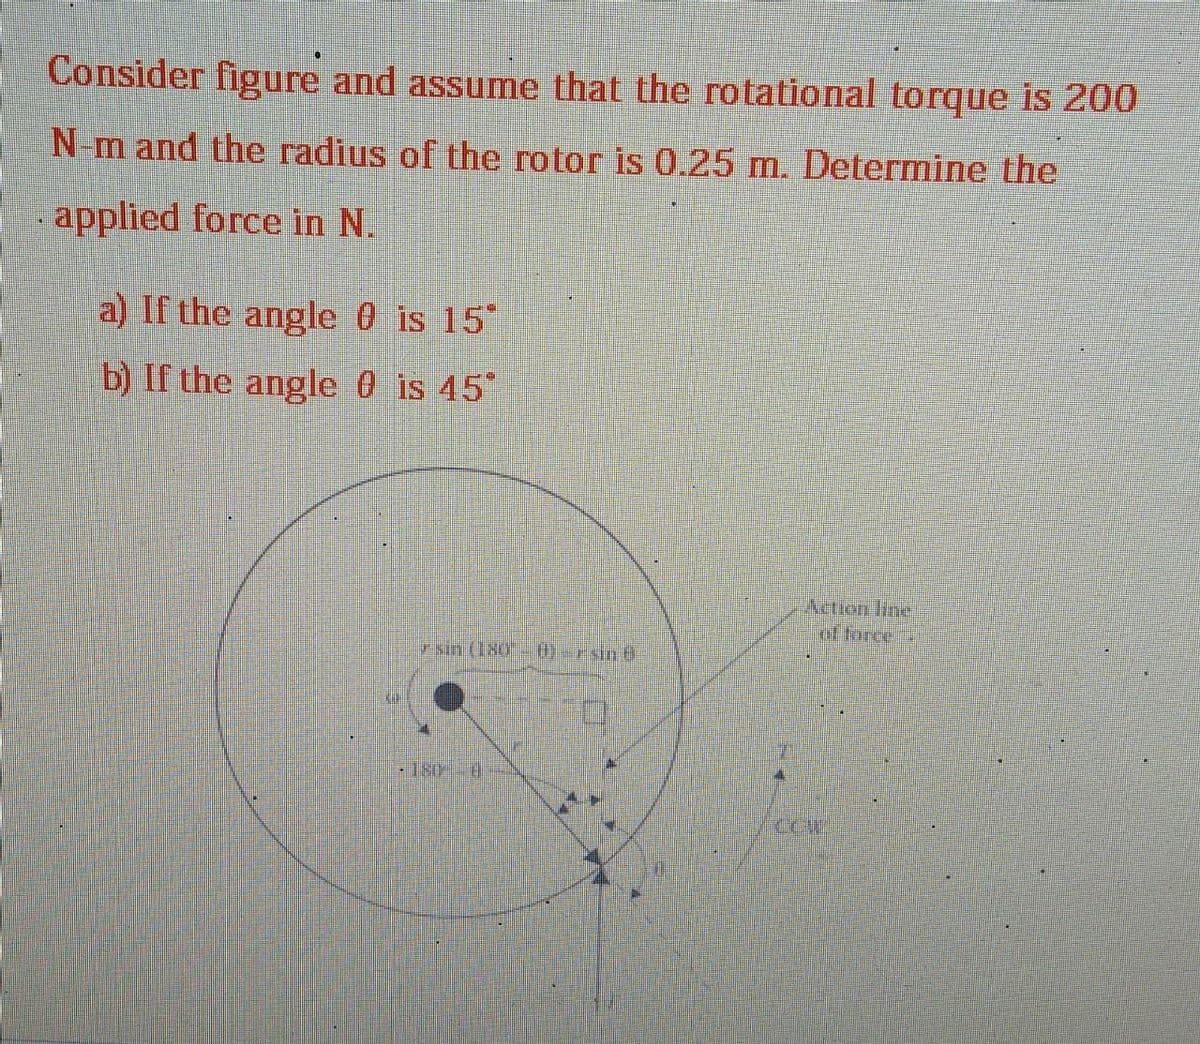 #T
Consider figure and assume that the rotational torque is 200
N-m and the radius of the rotor is 0.25 m. Determine the
applied force in N.
a) If the angle 0 is 15°
b) If the angle 0 is 45°
AIN
sin (180 - 0)=rand
Action line